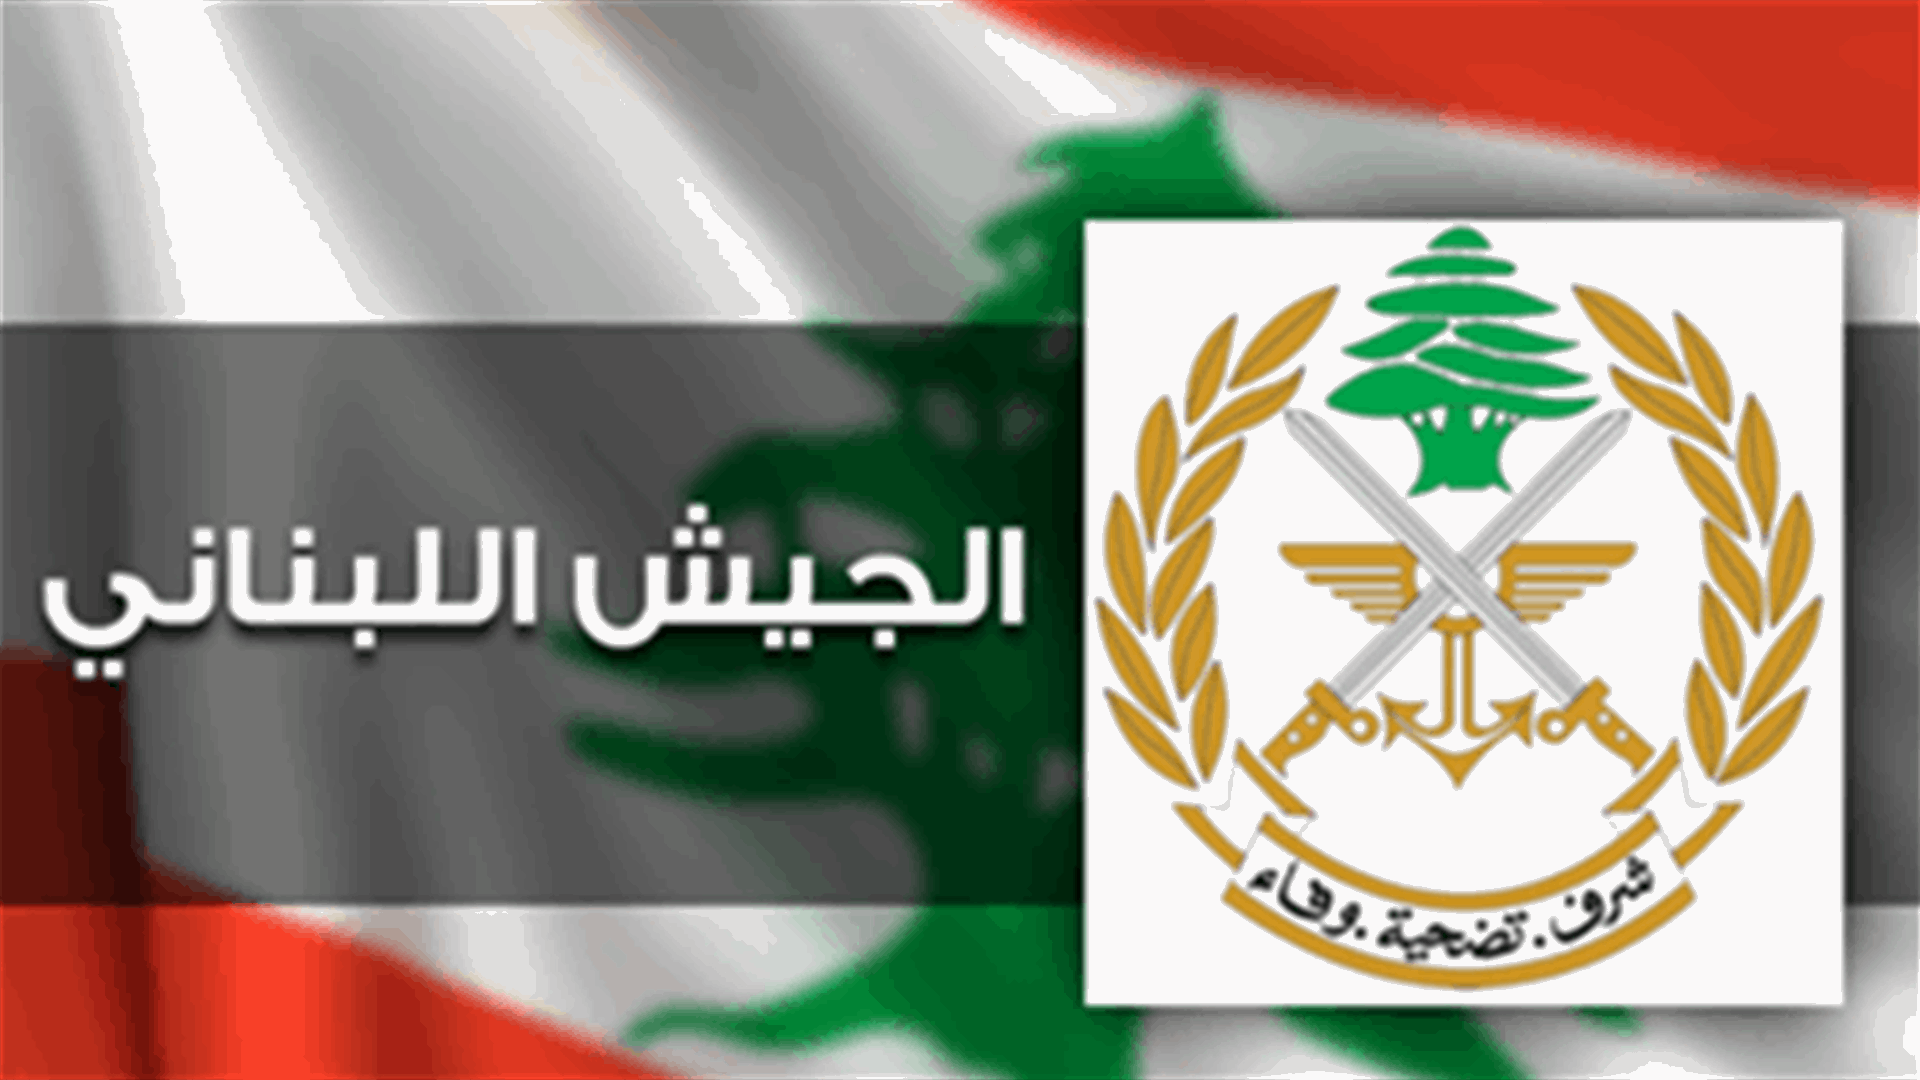 Lebanese national arrested for kidnapping a child